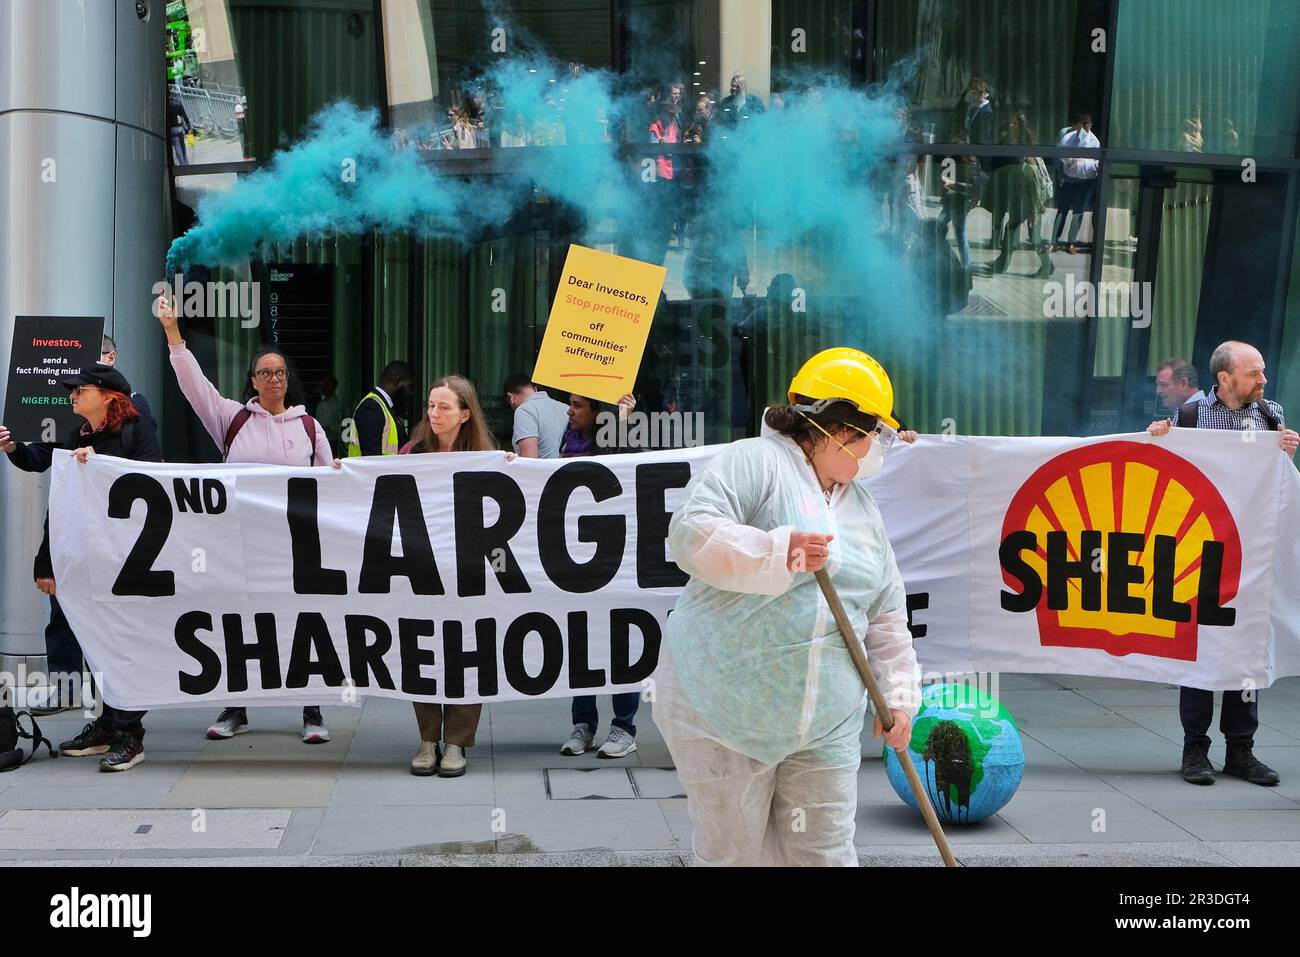 London, UK. 23rd May, 2023. Extinction Rebellion activists stage a protest outside the second largest Shell shareholder, Vanguard, in the City of London against the continued investment in fossil fuels and environmental destruction. On the day of the oil giant's AGM, activists protested by entering the meeting and demonstrated outside BlackRock. Credit: Eleventh Hour Photography/Alamy Live News Stock Photo